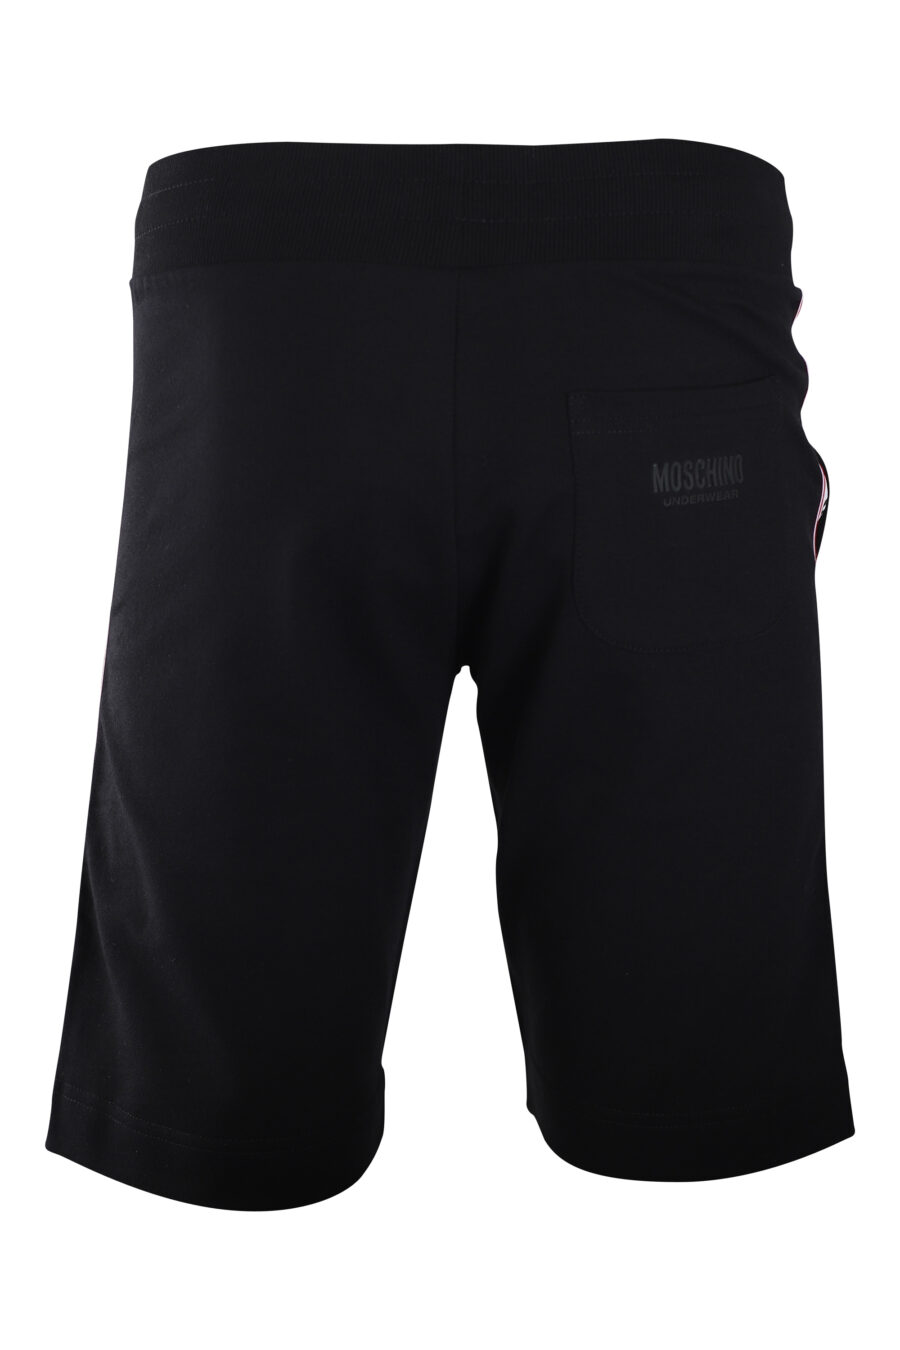 Tracksuit bottoms black with logo on side bands - IMG 2237